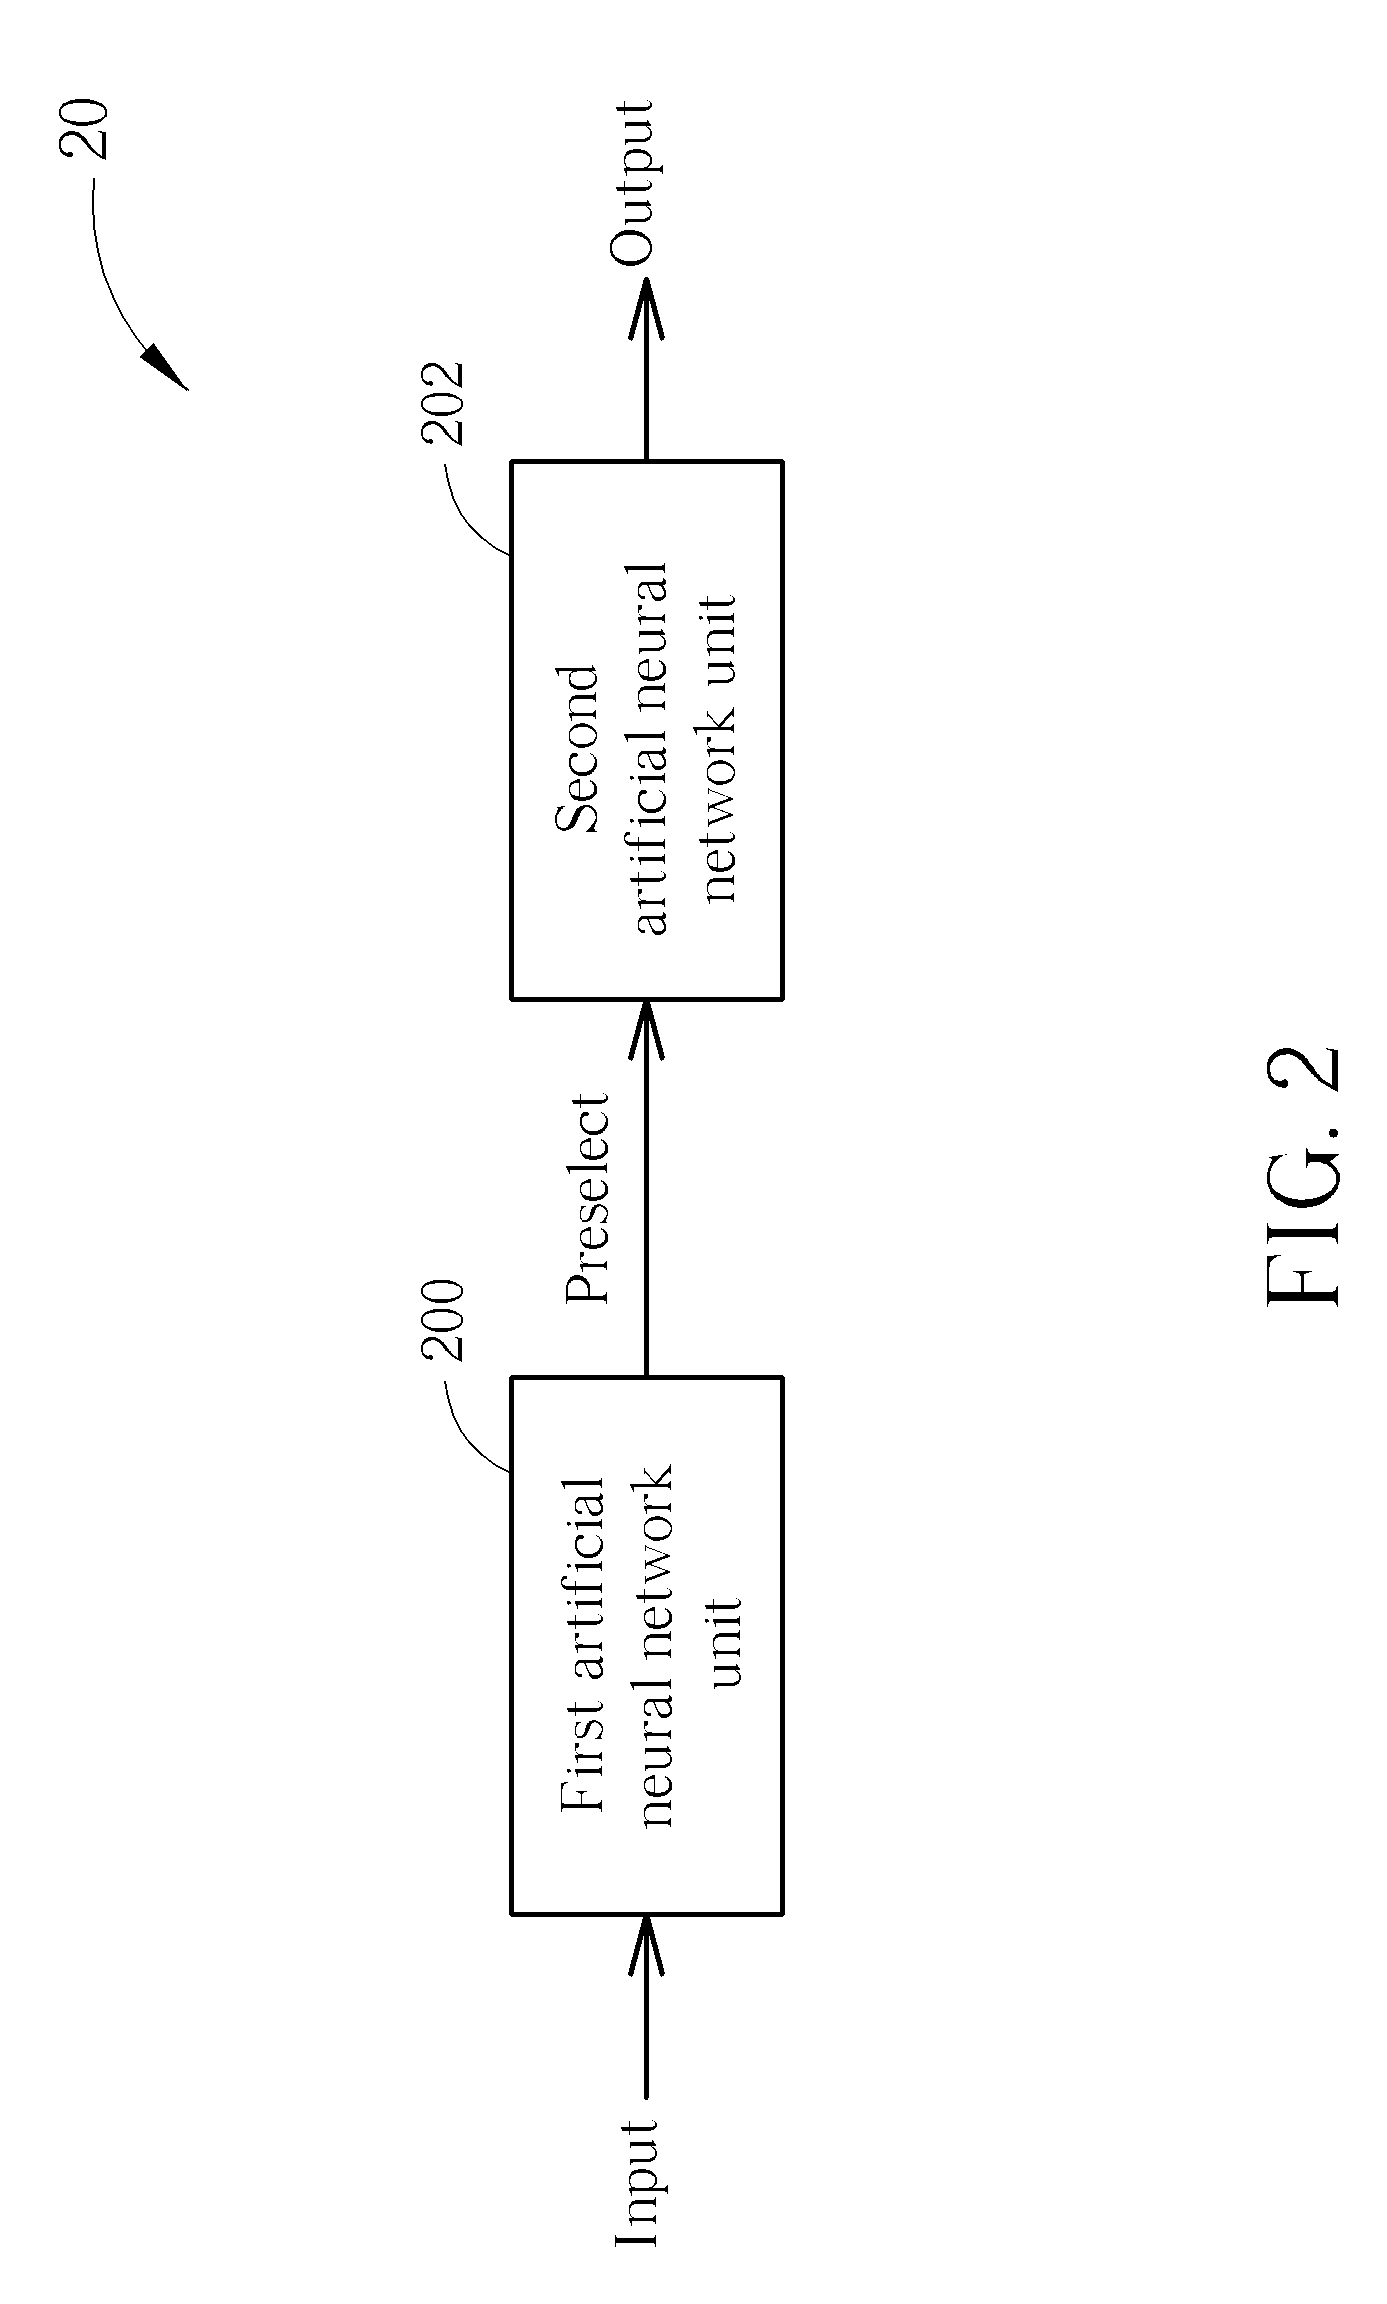 Method and system for selecting base stations to position mobile device